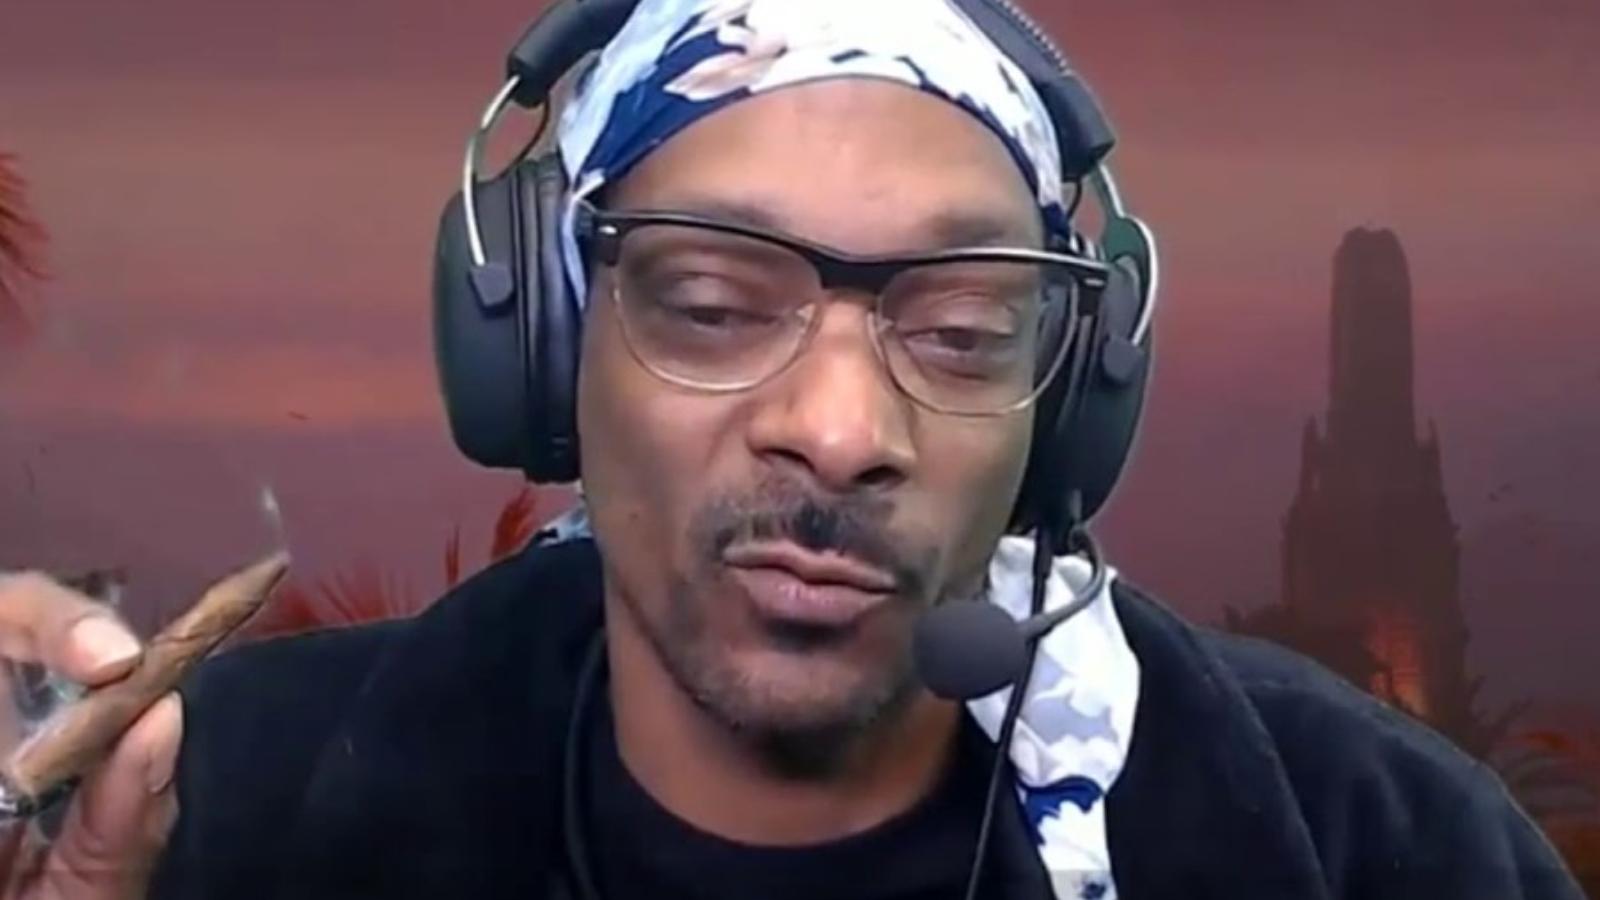 snoop dogg streaming on twitch